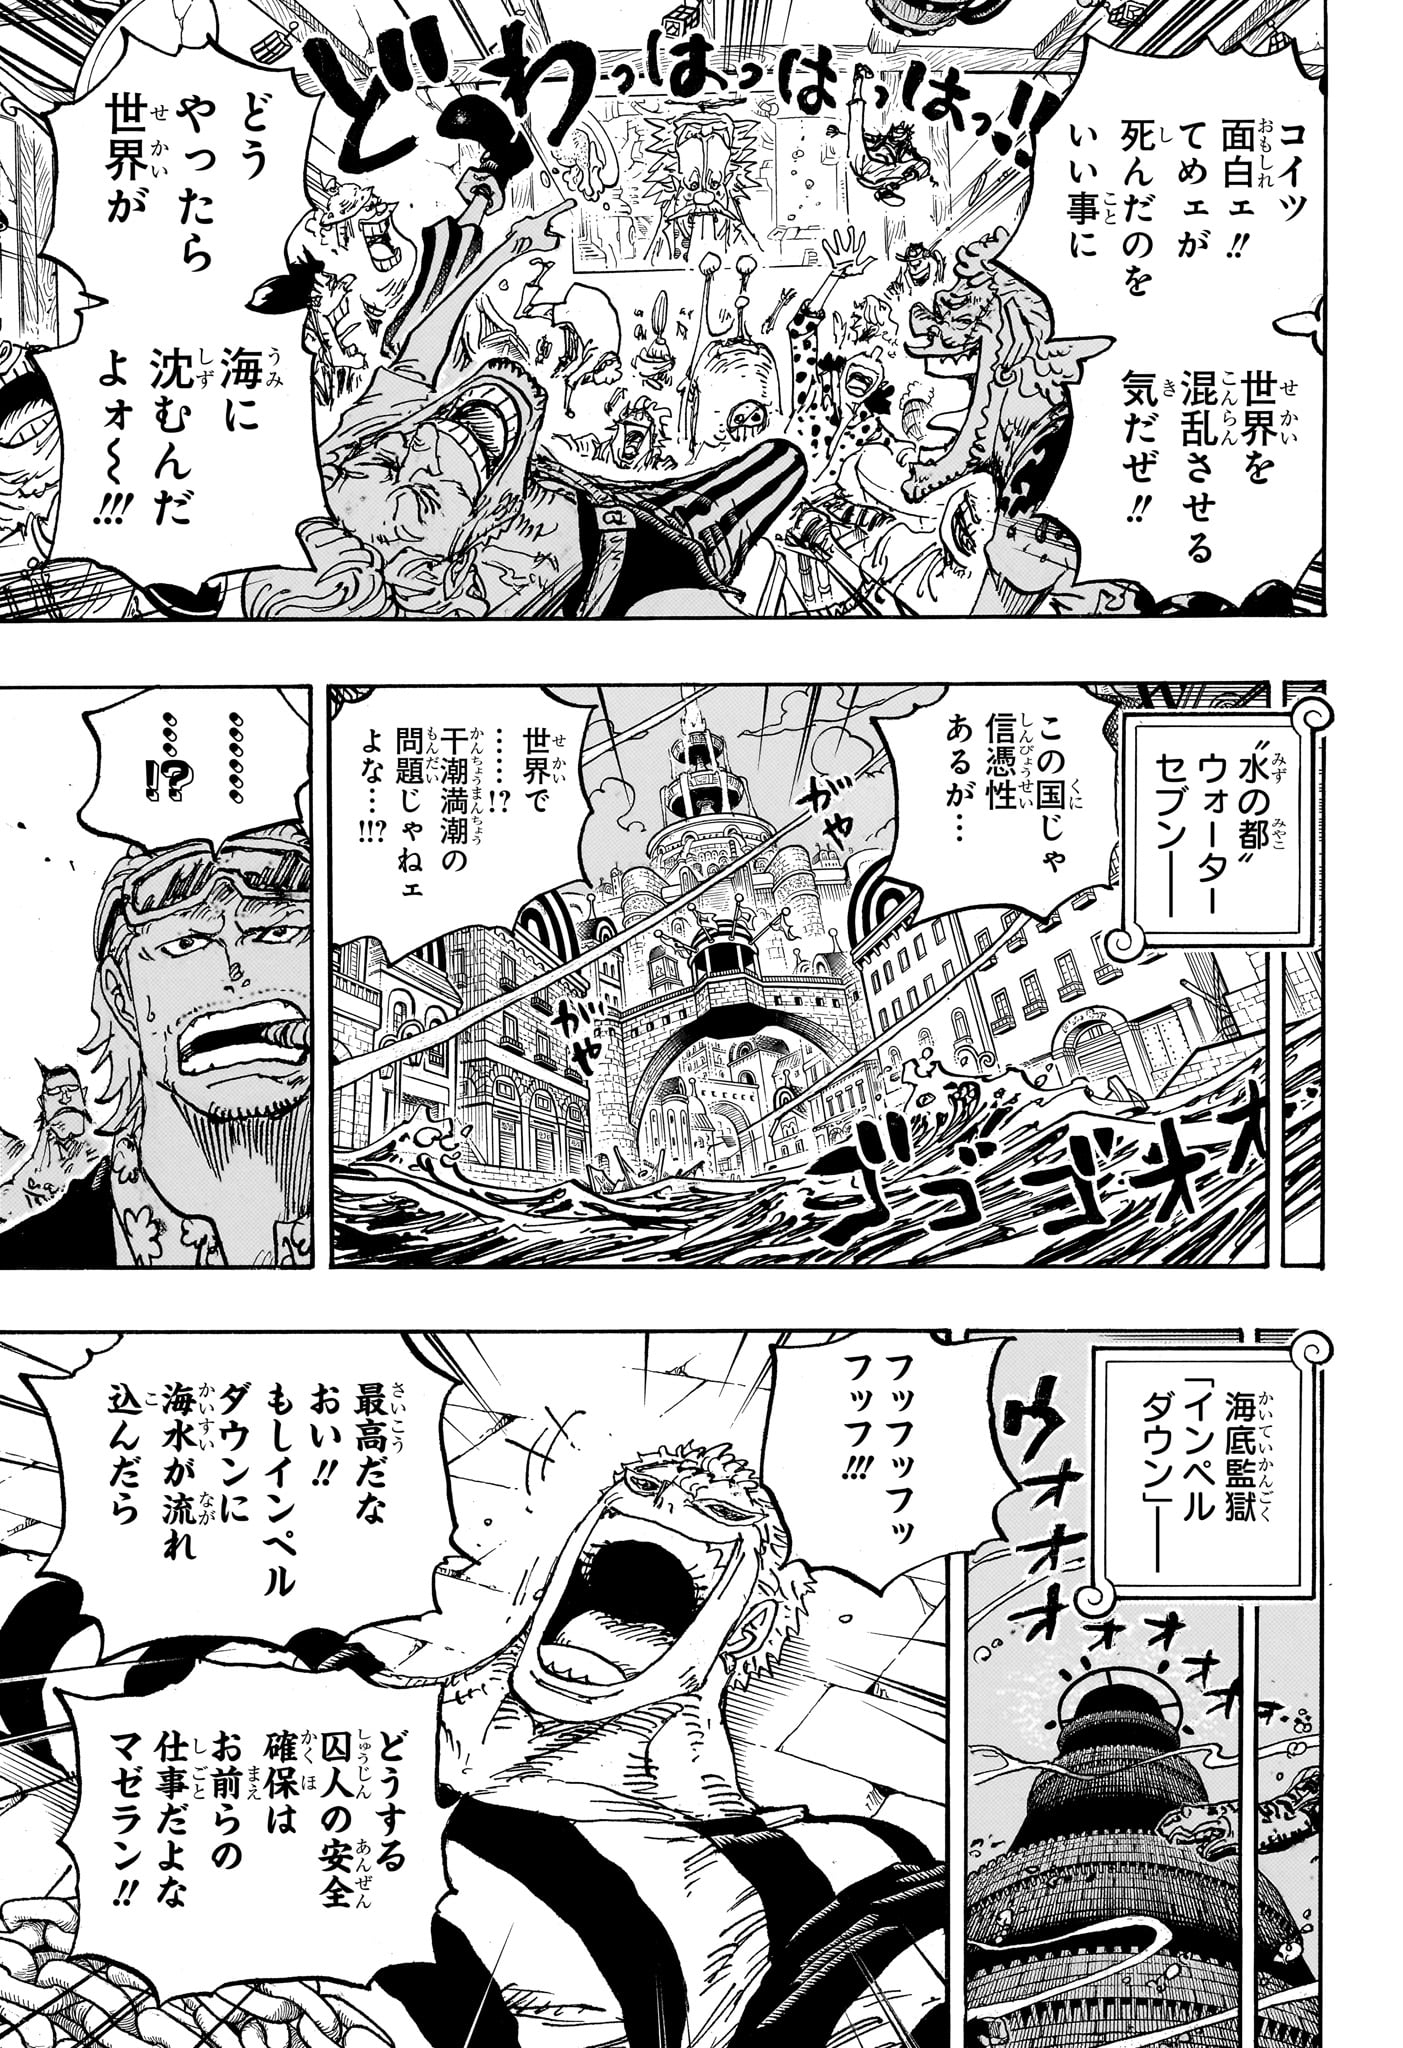 One Piece - Chapter 1114 - Page 3